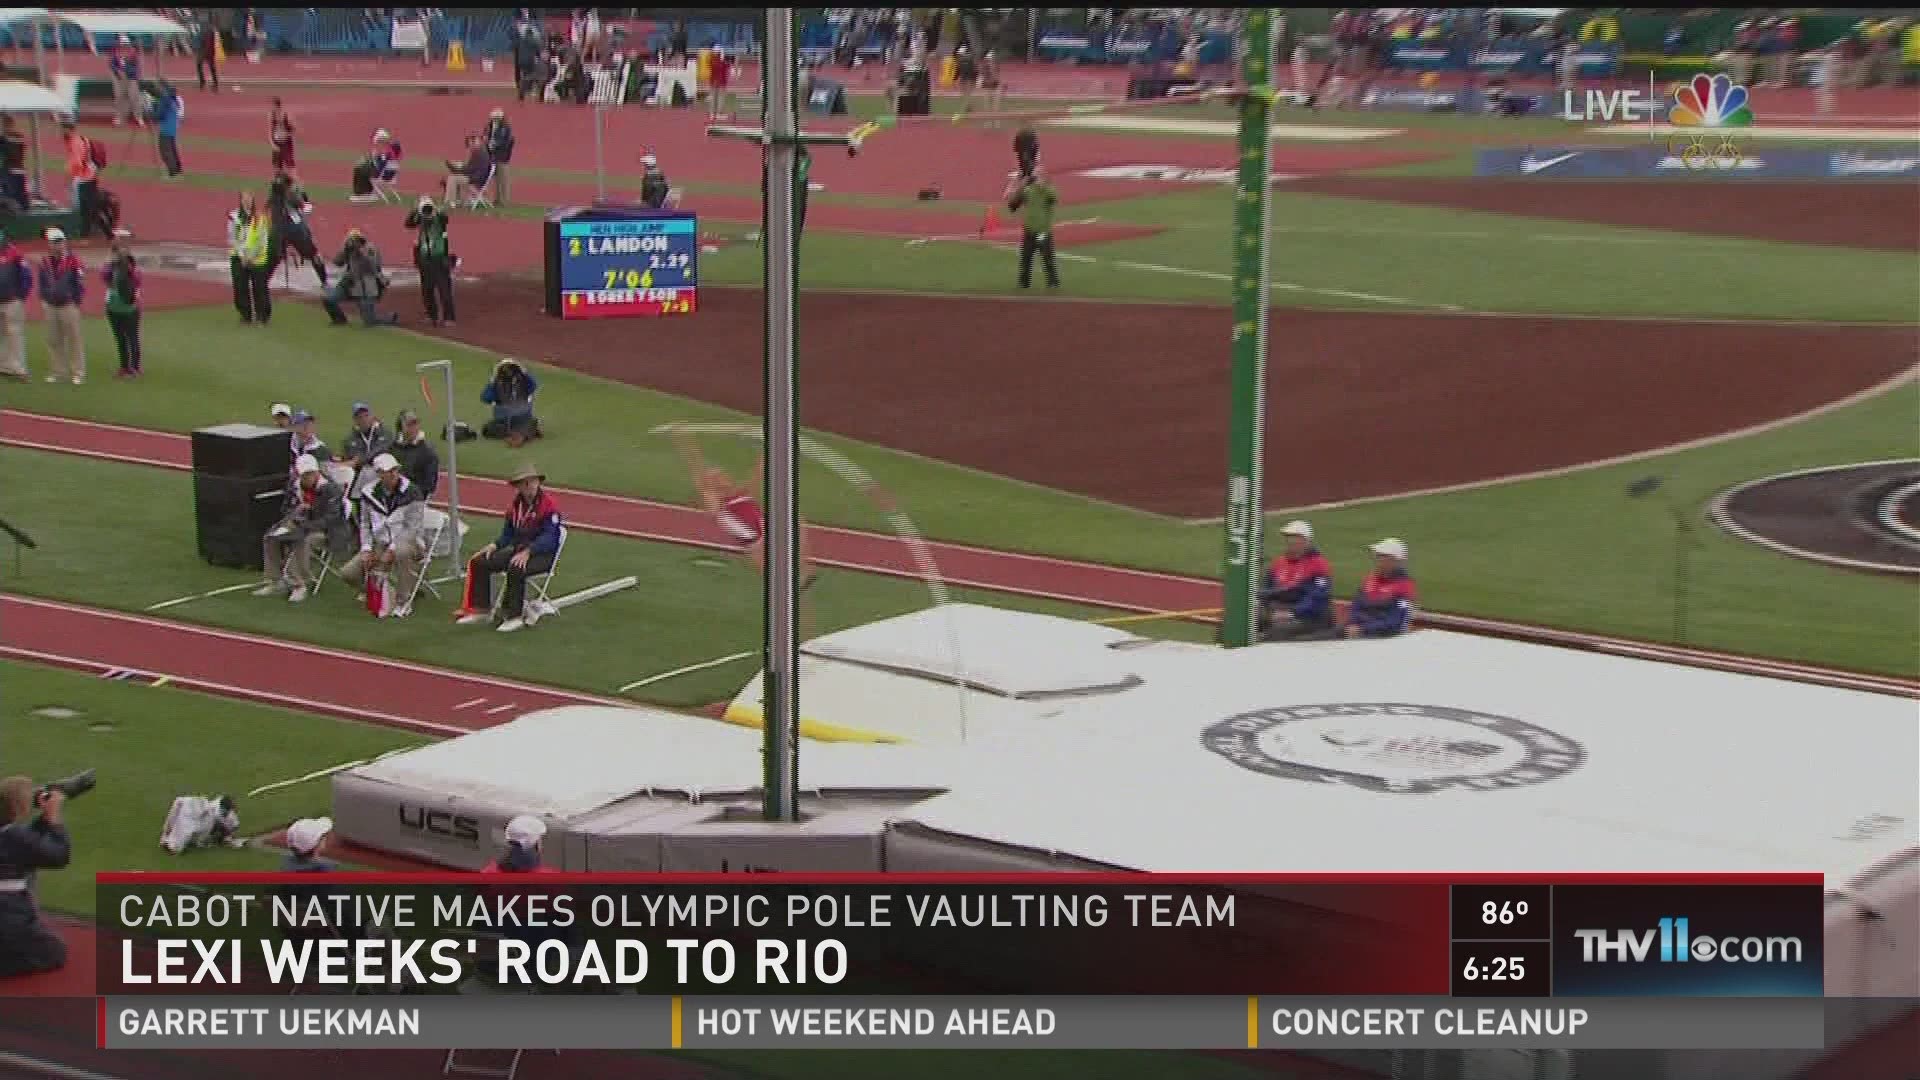 19-year-old Cabot native Lexi Weeks punched her ticket to the 2016 Olympic games in Rio for pole vaulting